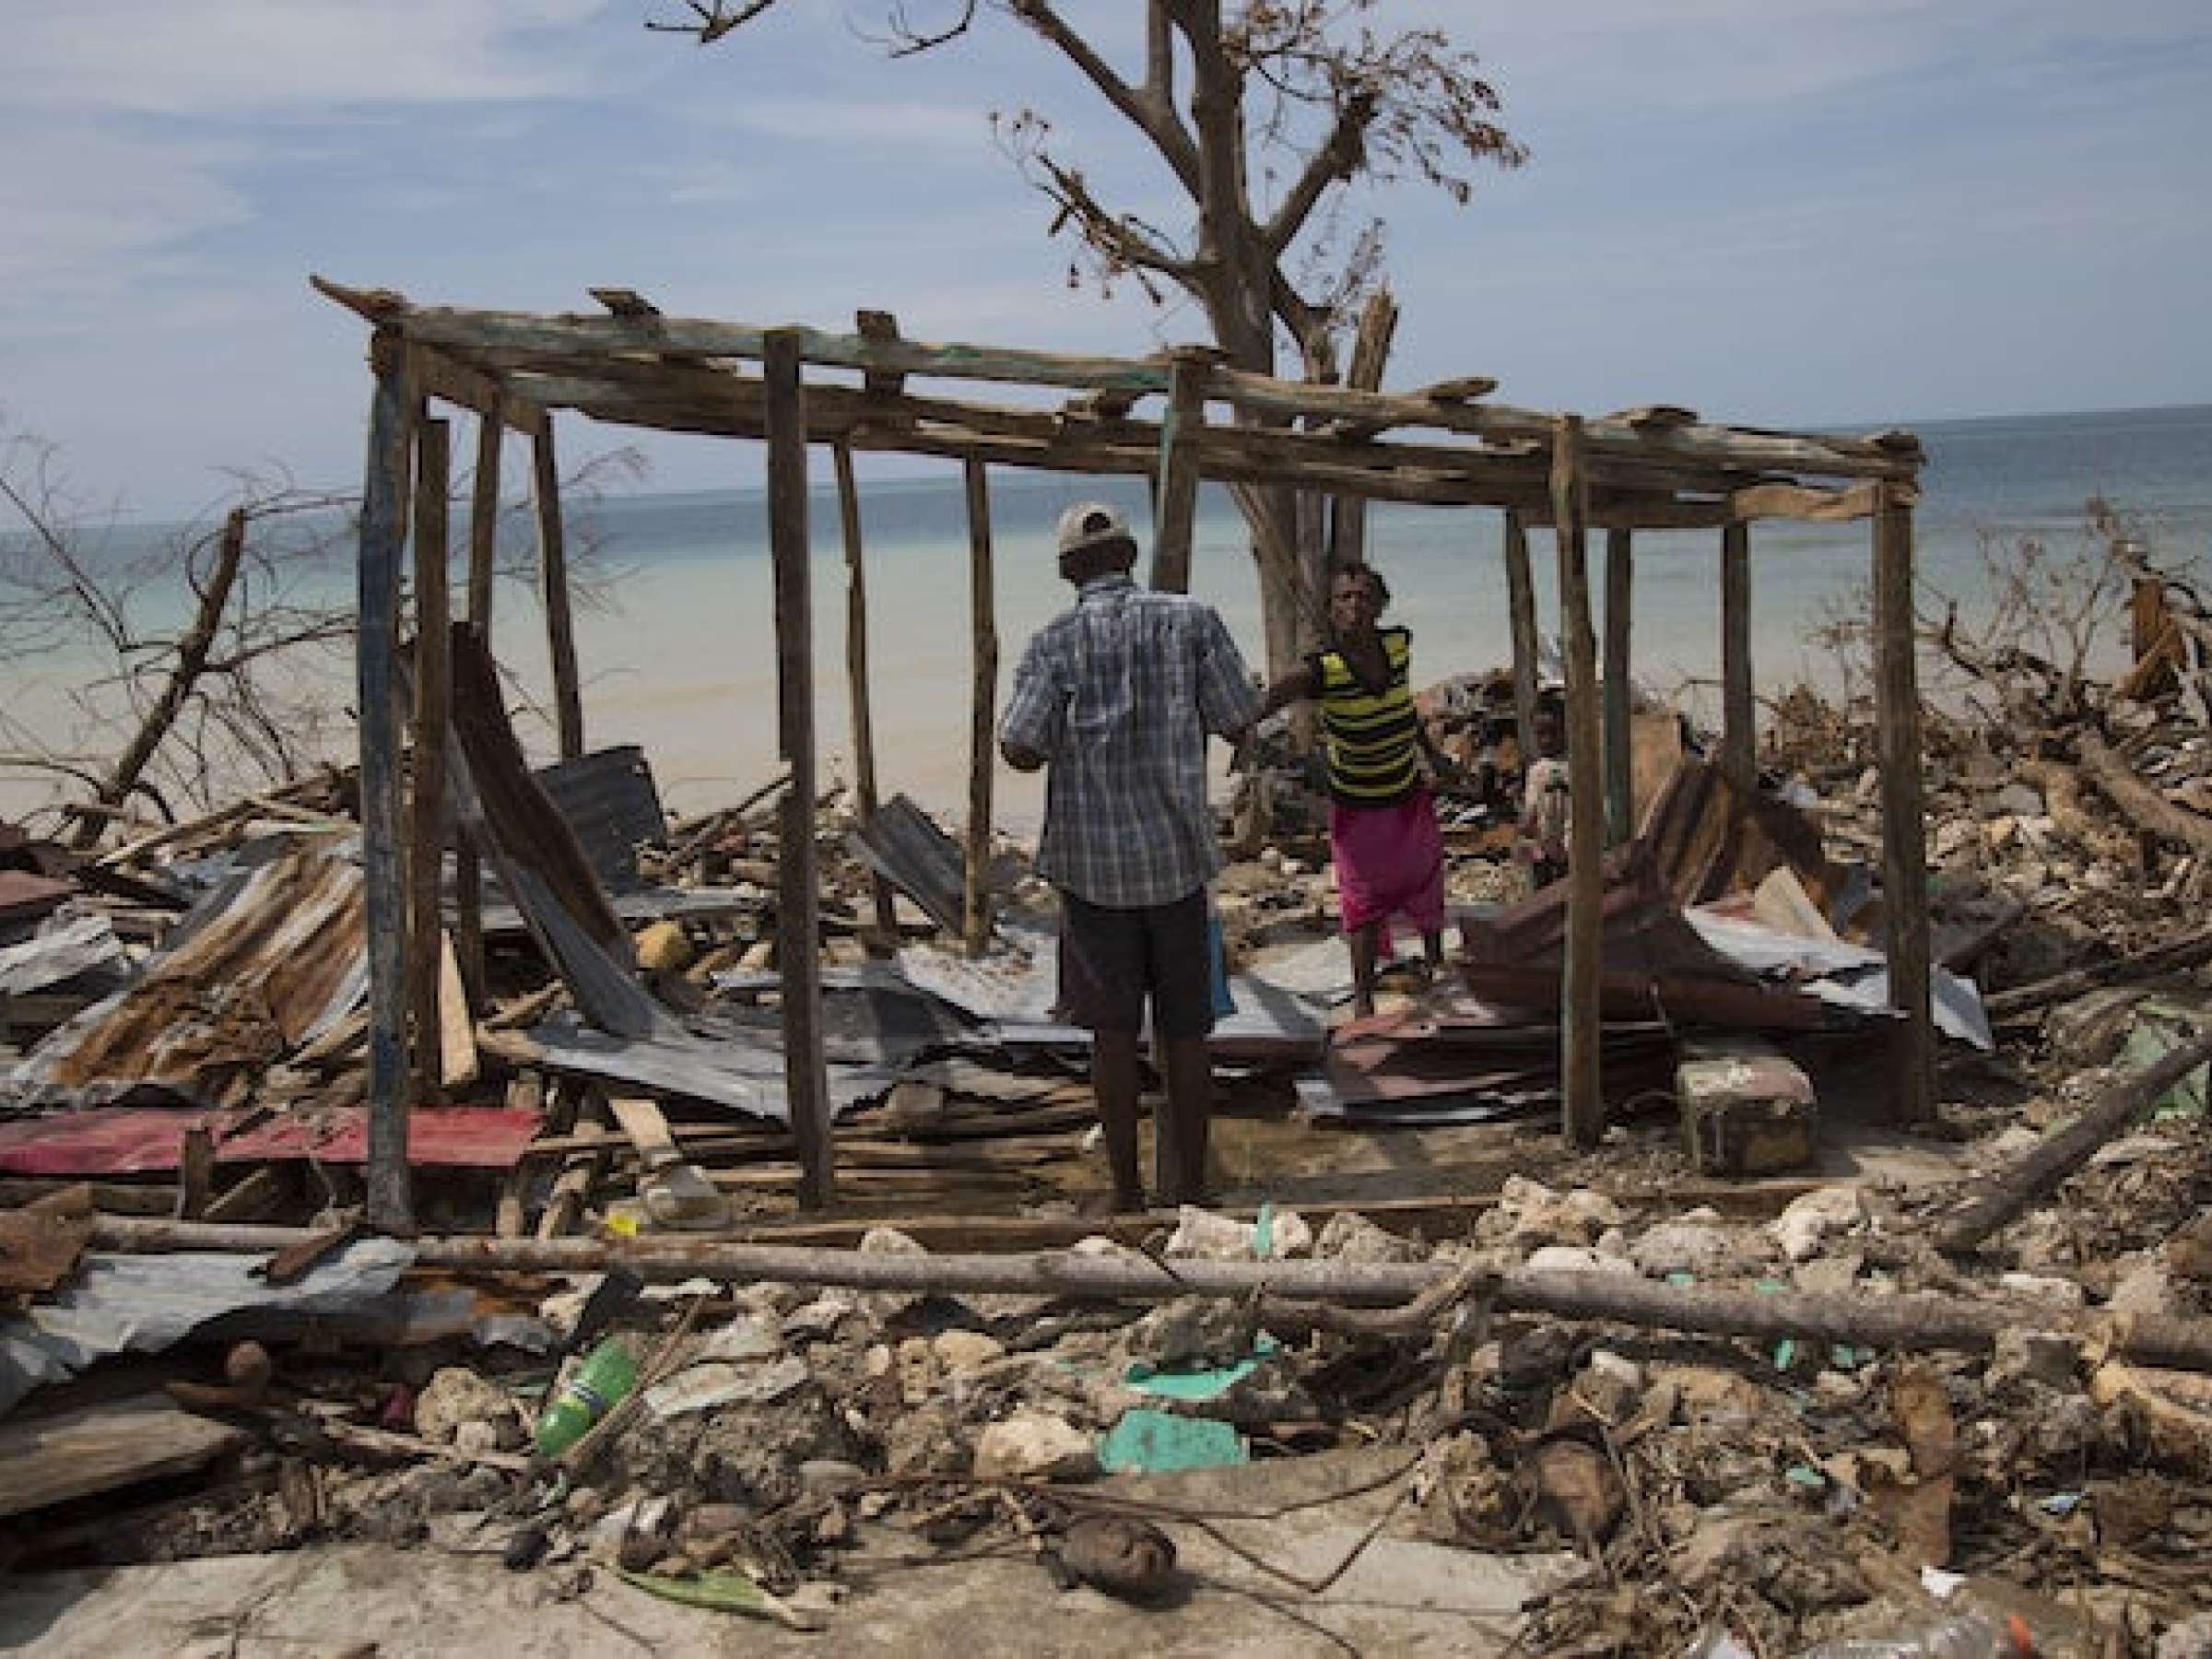 People in a destroyed house following Hurricane Matthew in Roche a Bateux, Haiti in October 2016